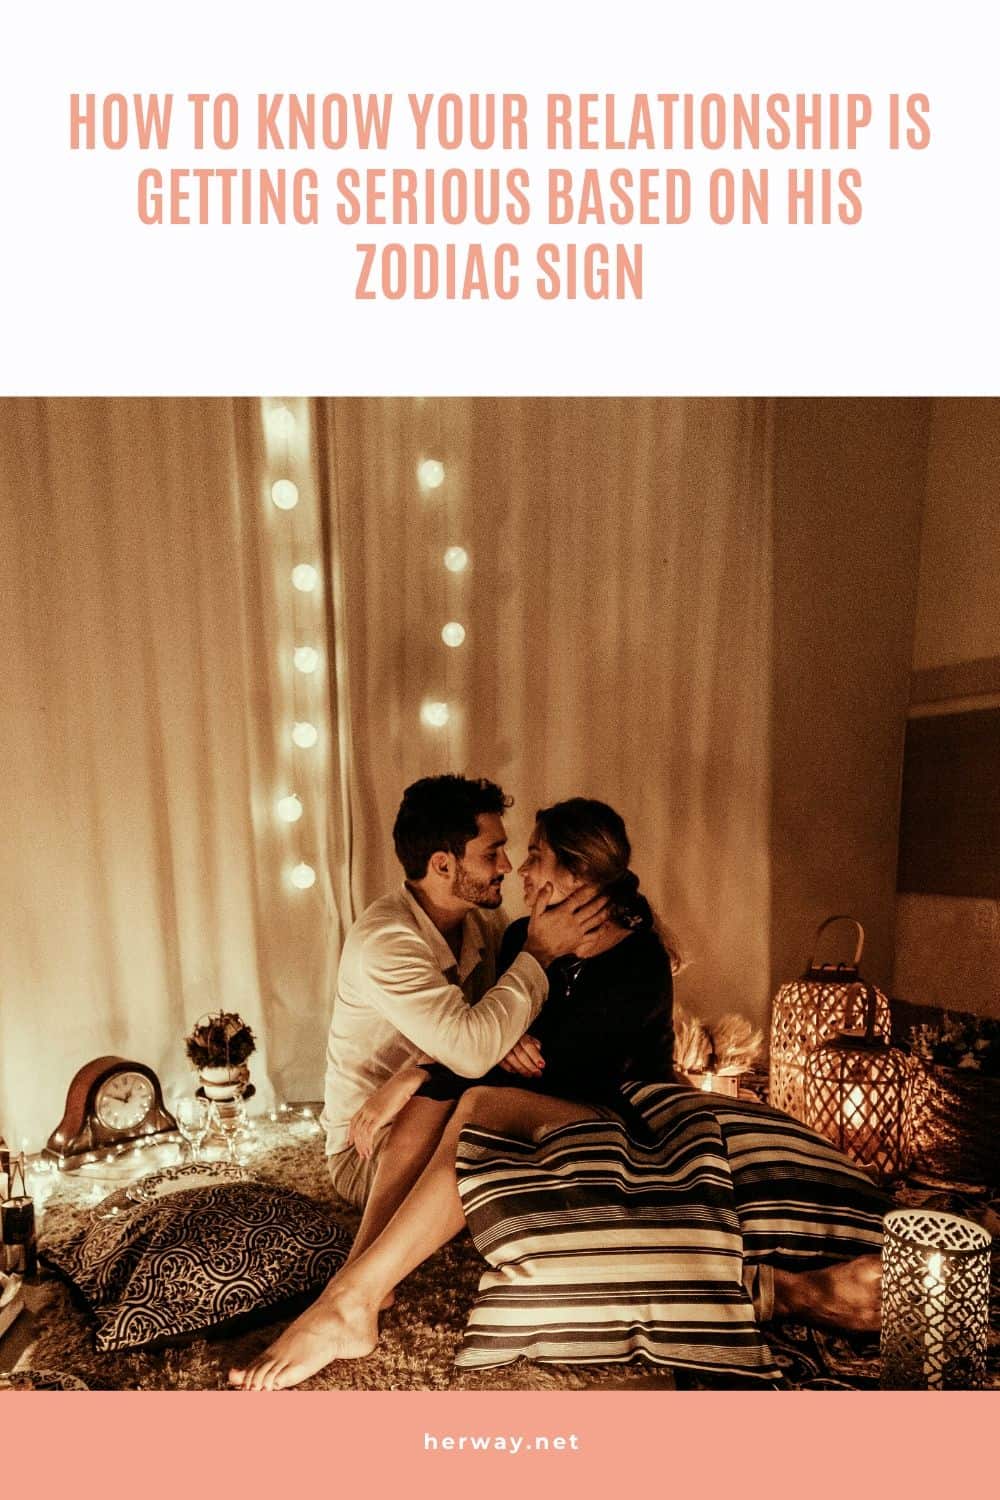 How To Know Your Relationship Is Getting Serious Based On His Zodiac Sign